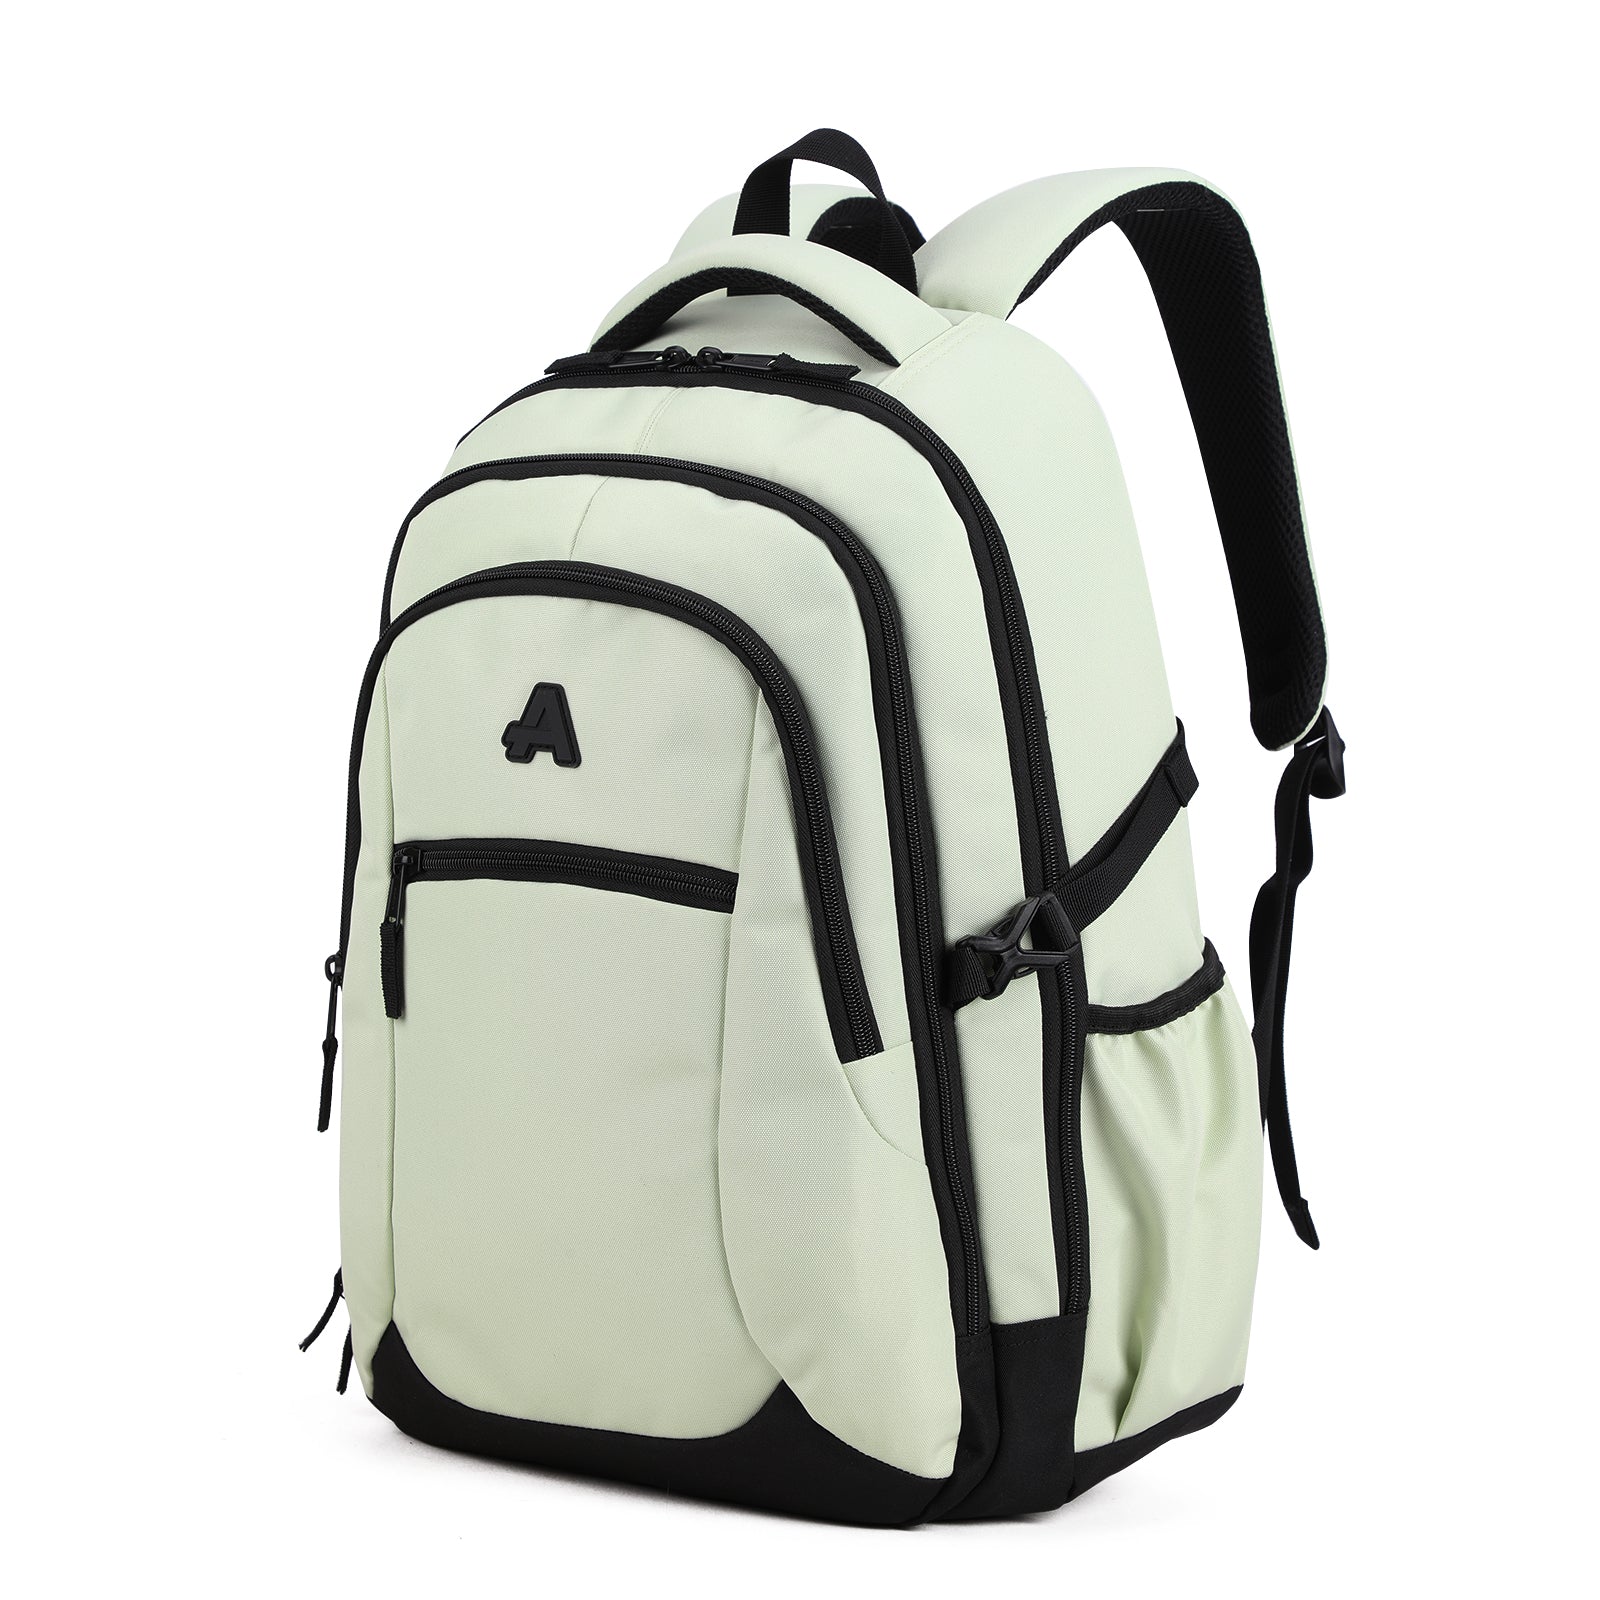 Aoking Travel Backpack SN2677 Light Green